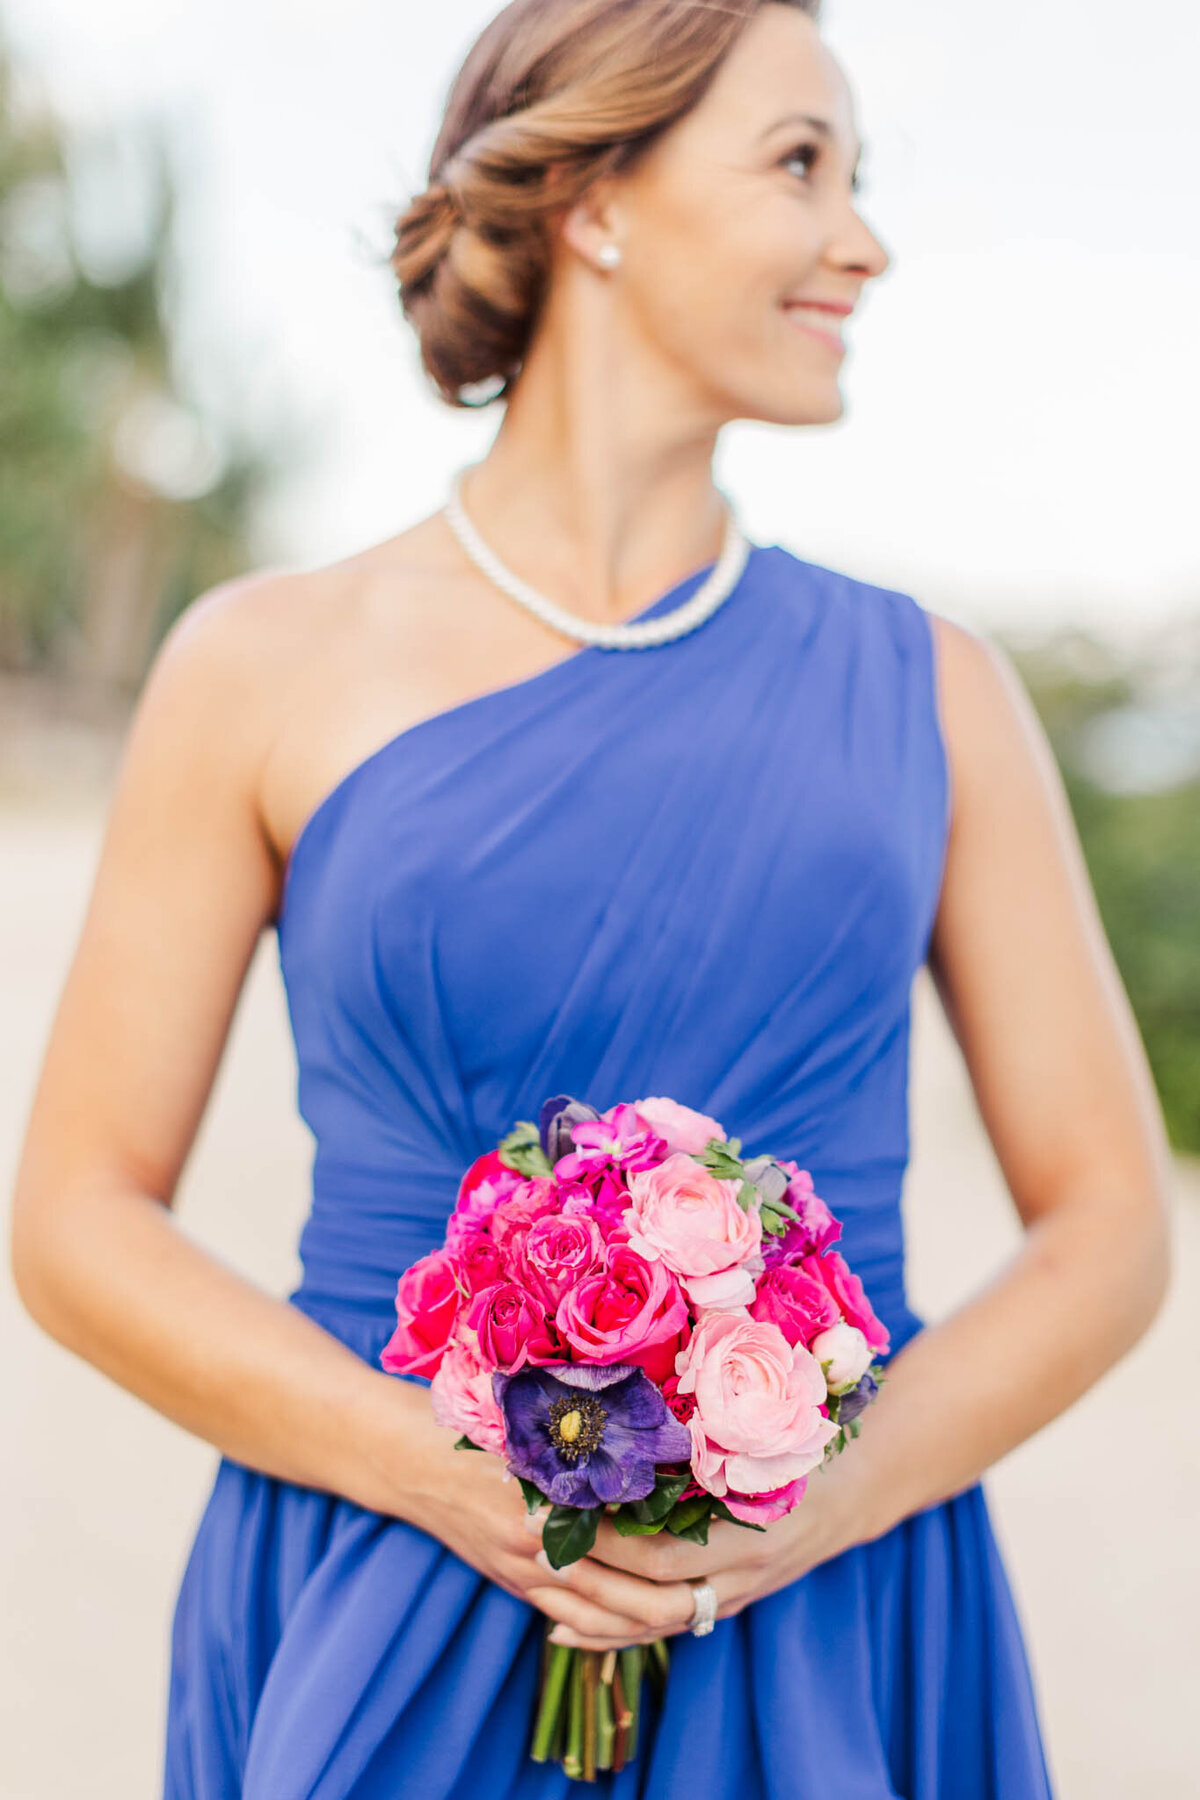 A detailed photo of the bridesmaids bouquets of flowers that are hot pink and purple